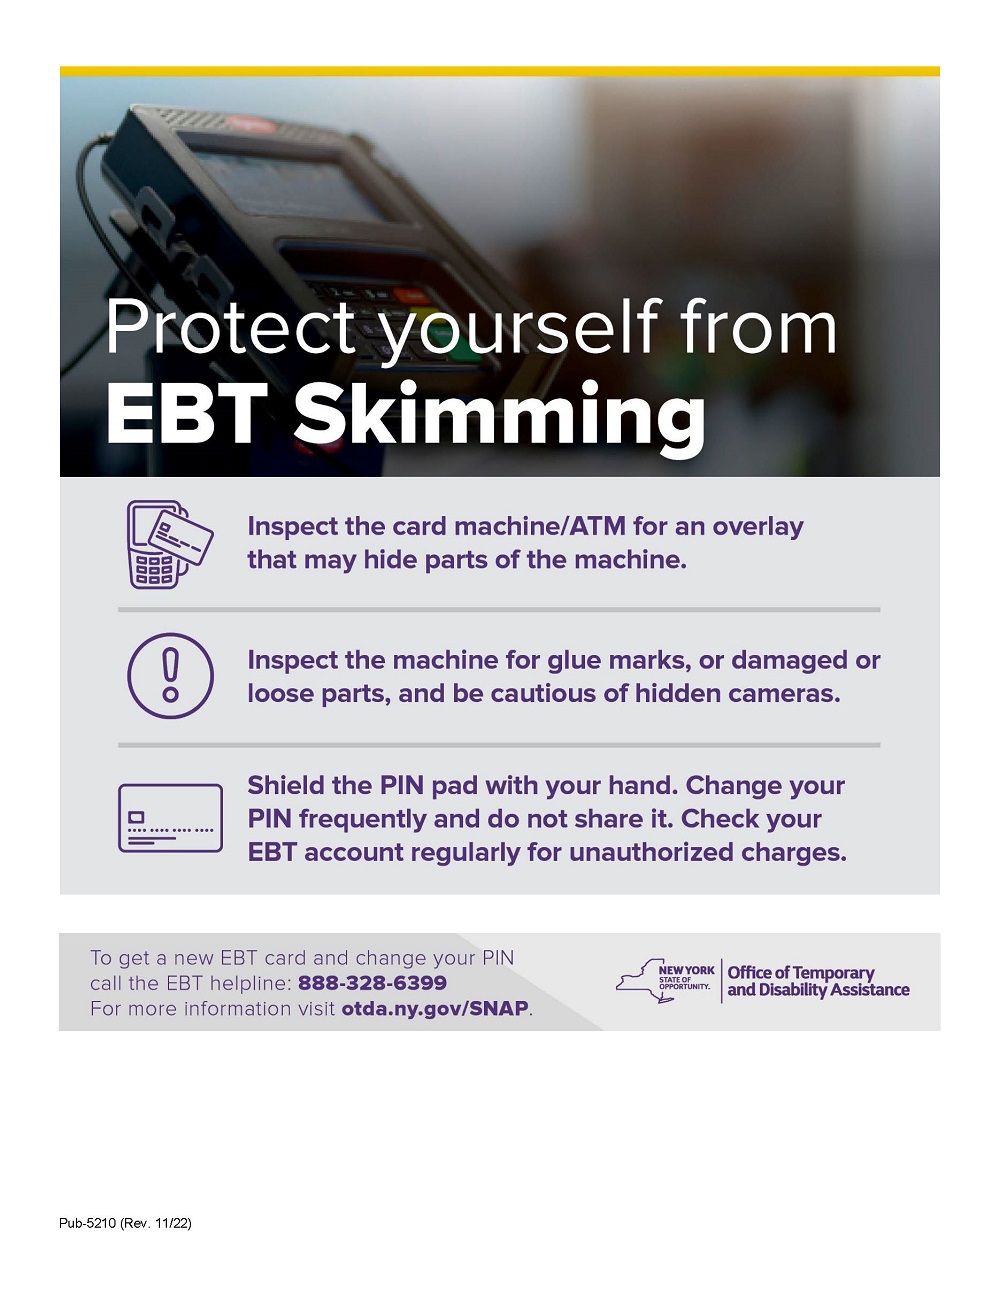 Protect Yourself From EBT Skimming